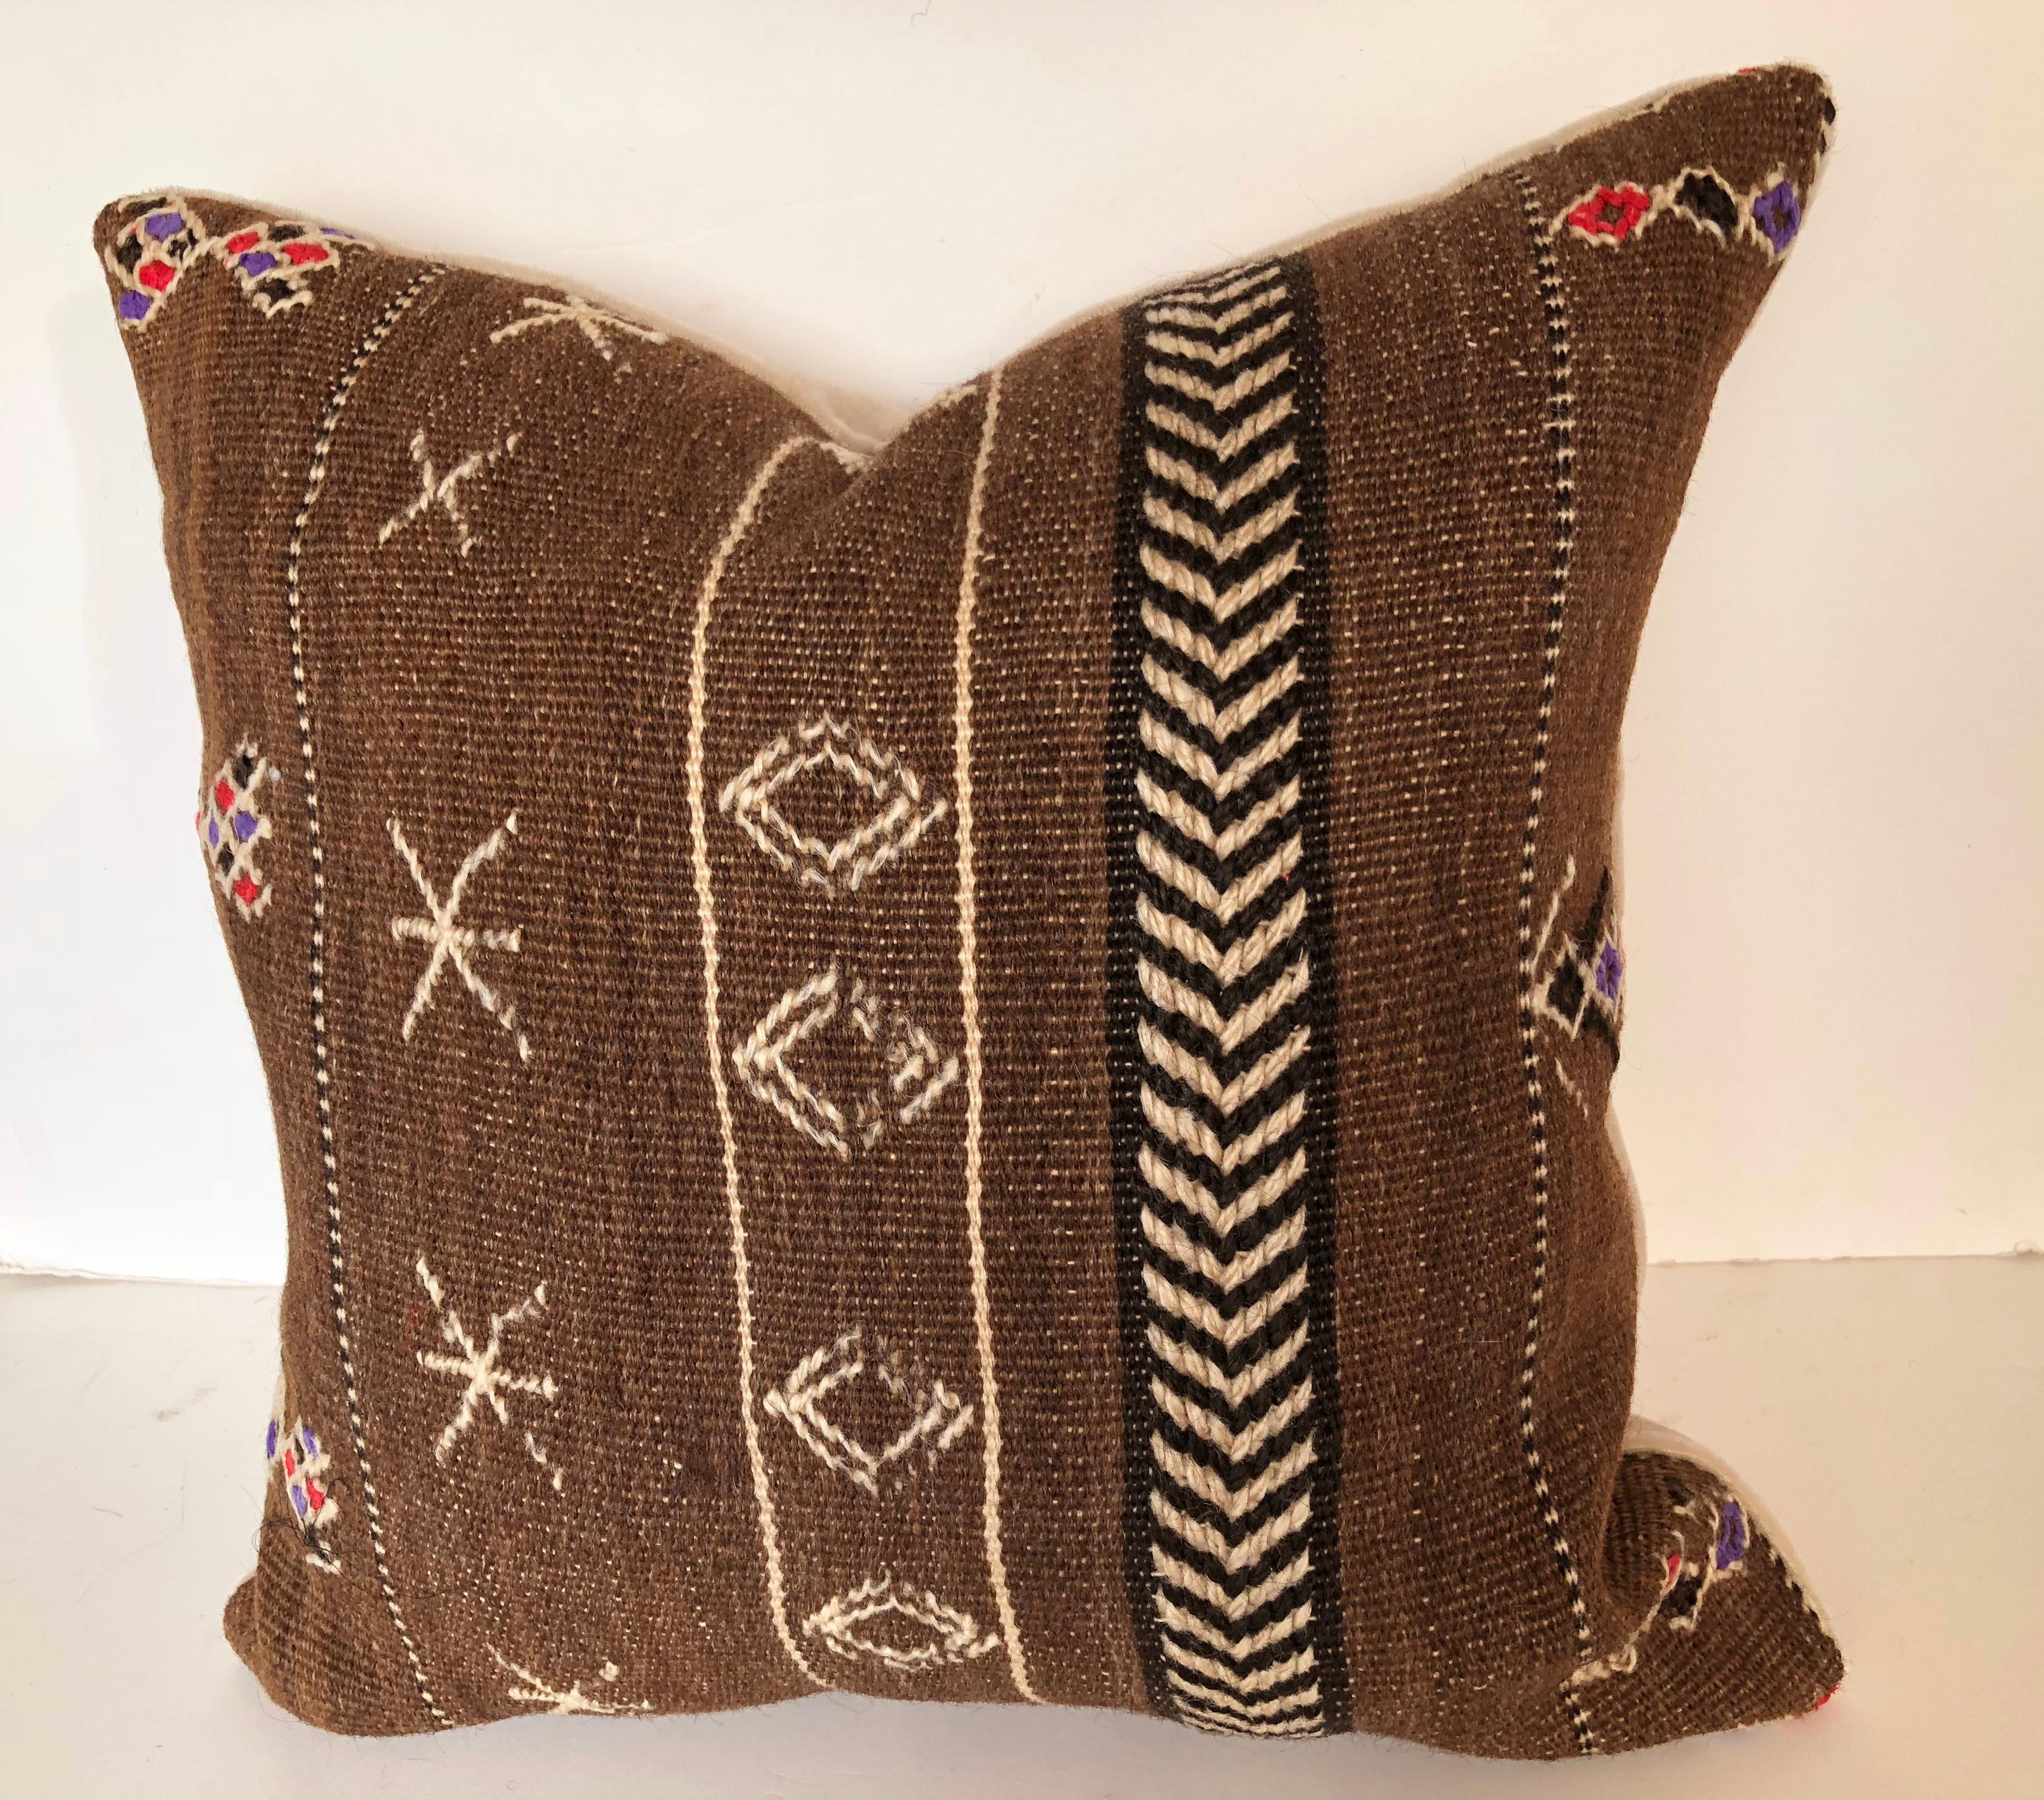 Custom pillows cut from a vintage hand loomed wool Moroccan Berber rug from the Ourika Valley in the Upper Atlas Mountains. Dark brown naturally colored wool has decorative tribal designs. Pillows are backed in cream mohair, filled with an insert of